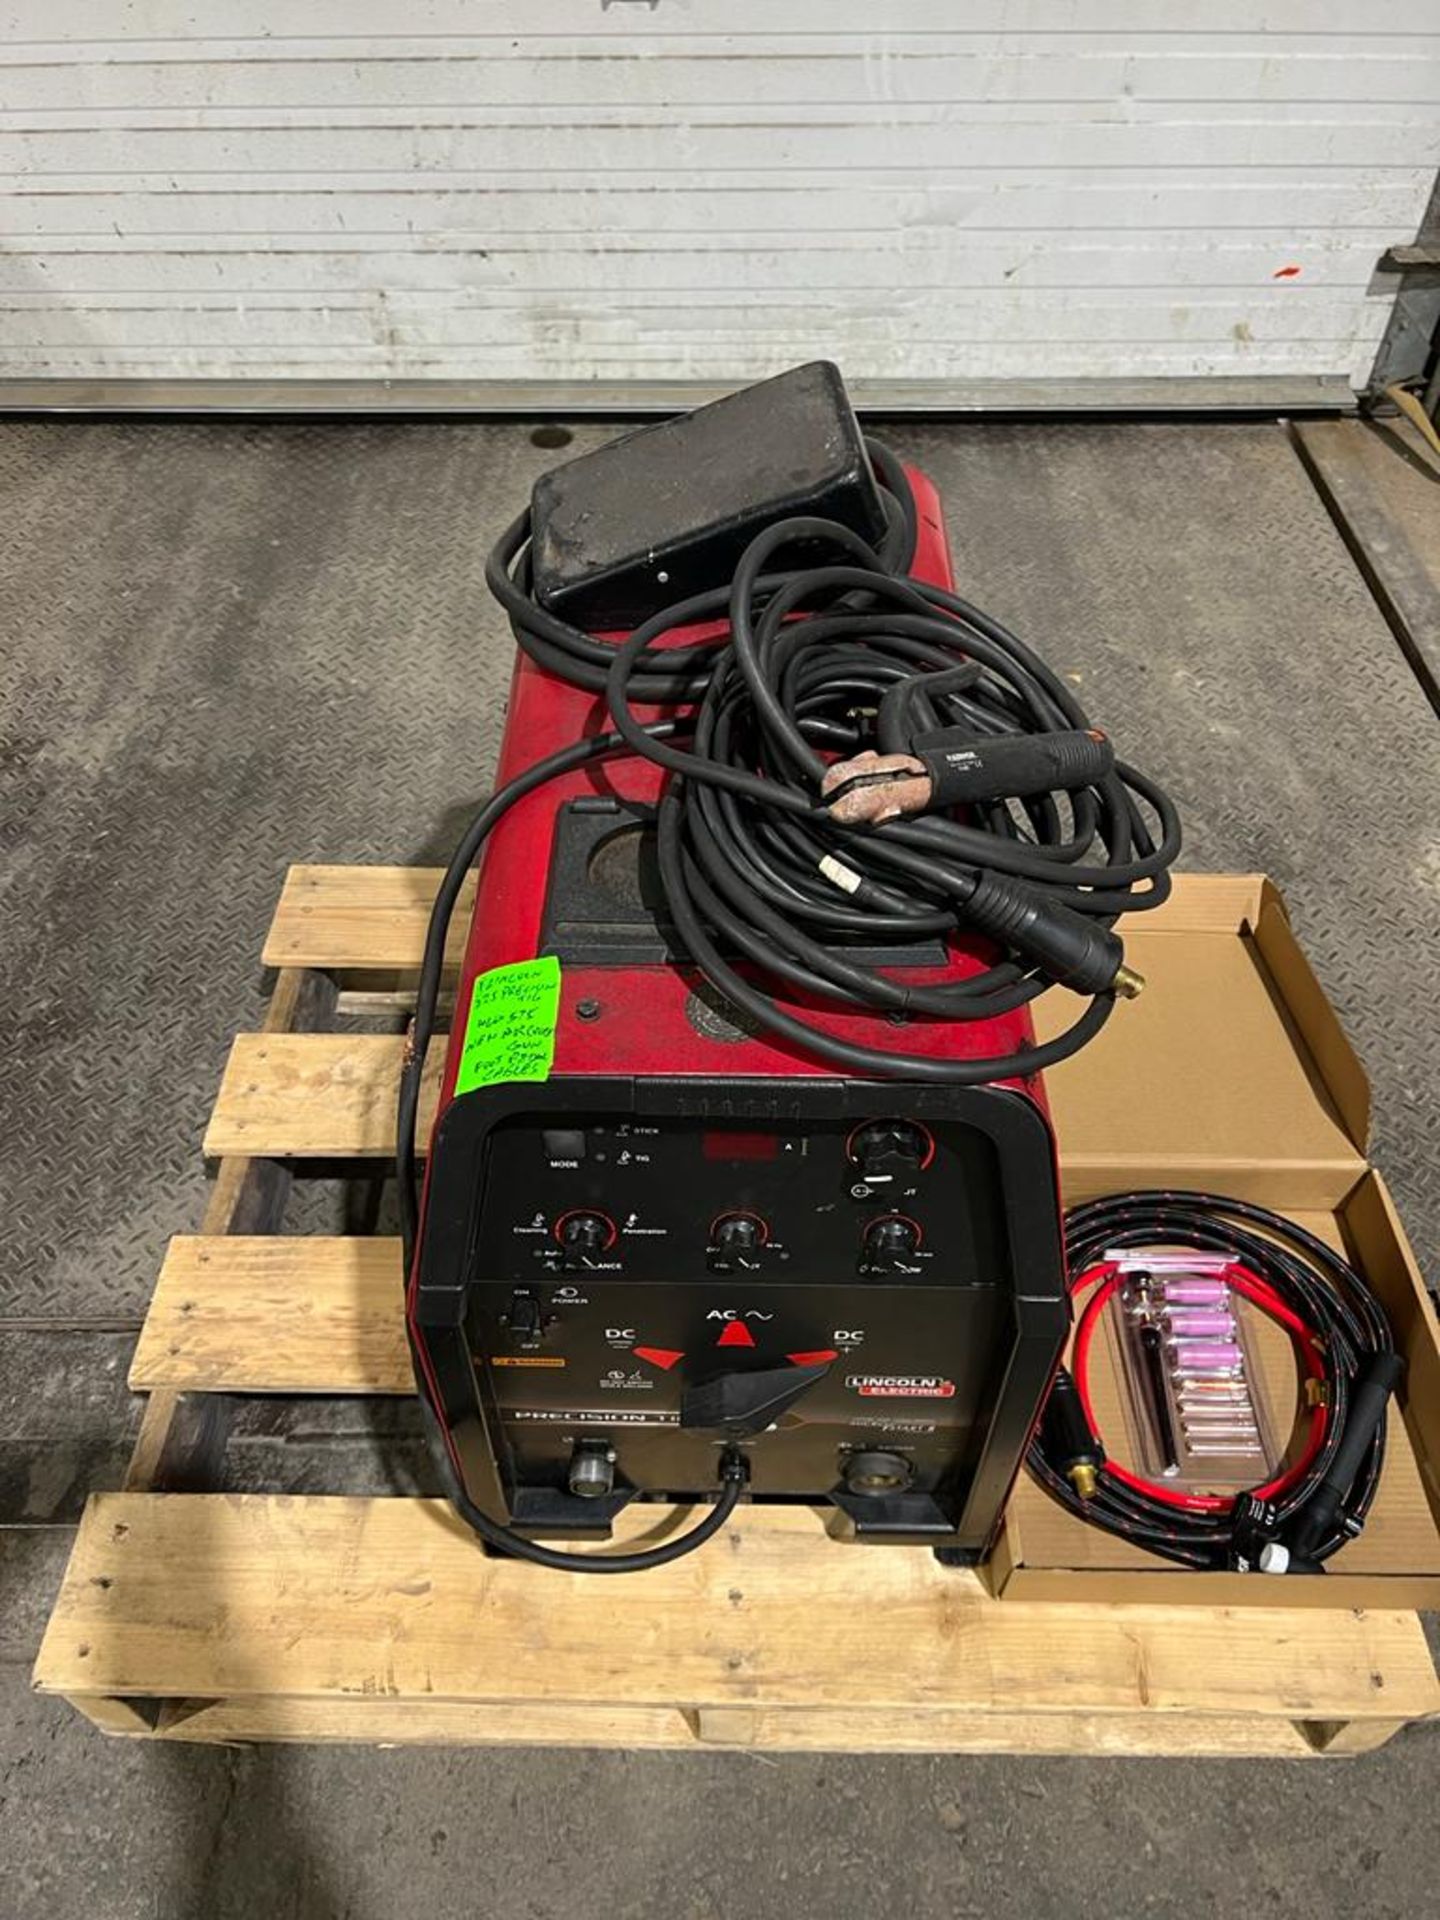 Lincoln Precision Tig 225 Tig Welder with NEW Air Cooled Gun with Cables and Foot Pedal 460/575V - Image 2 of 3